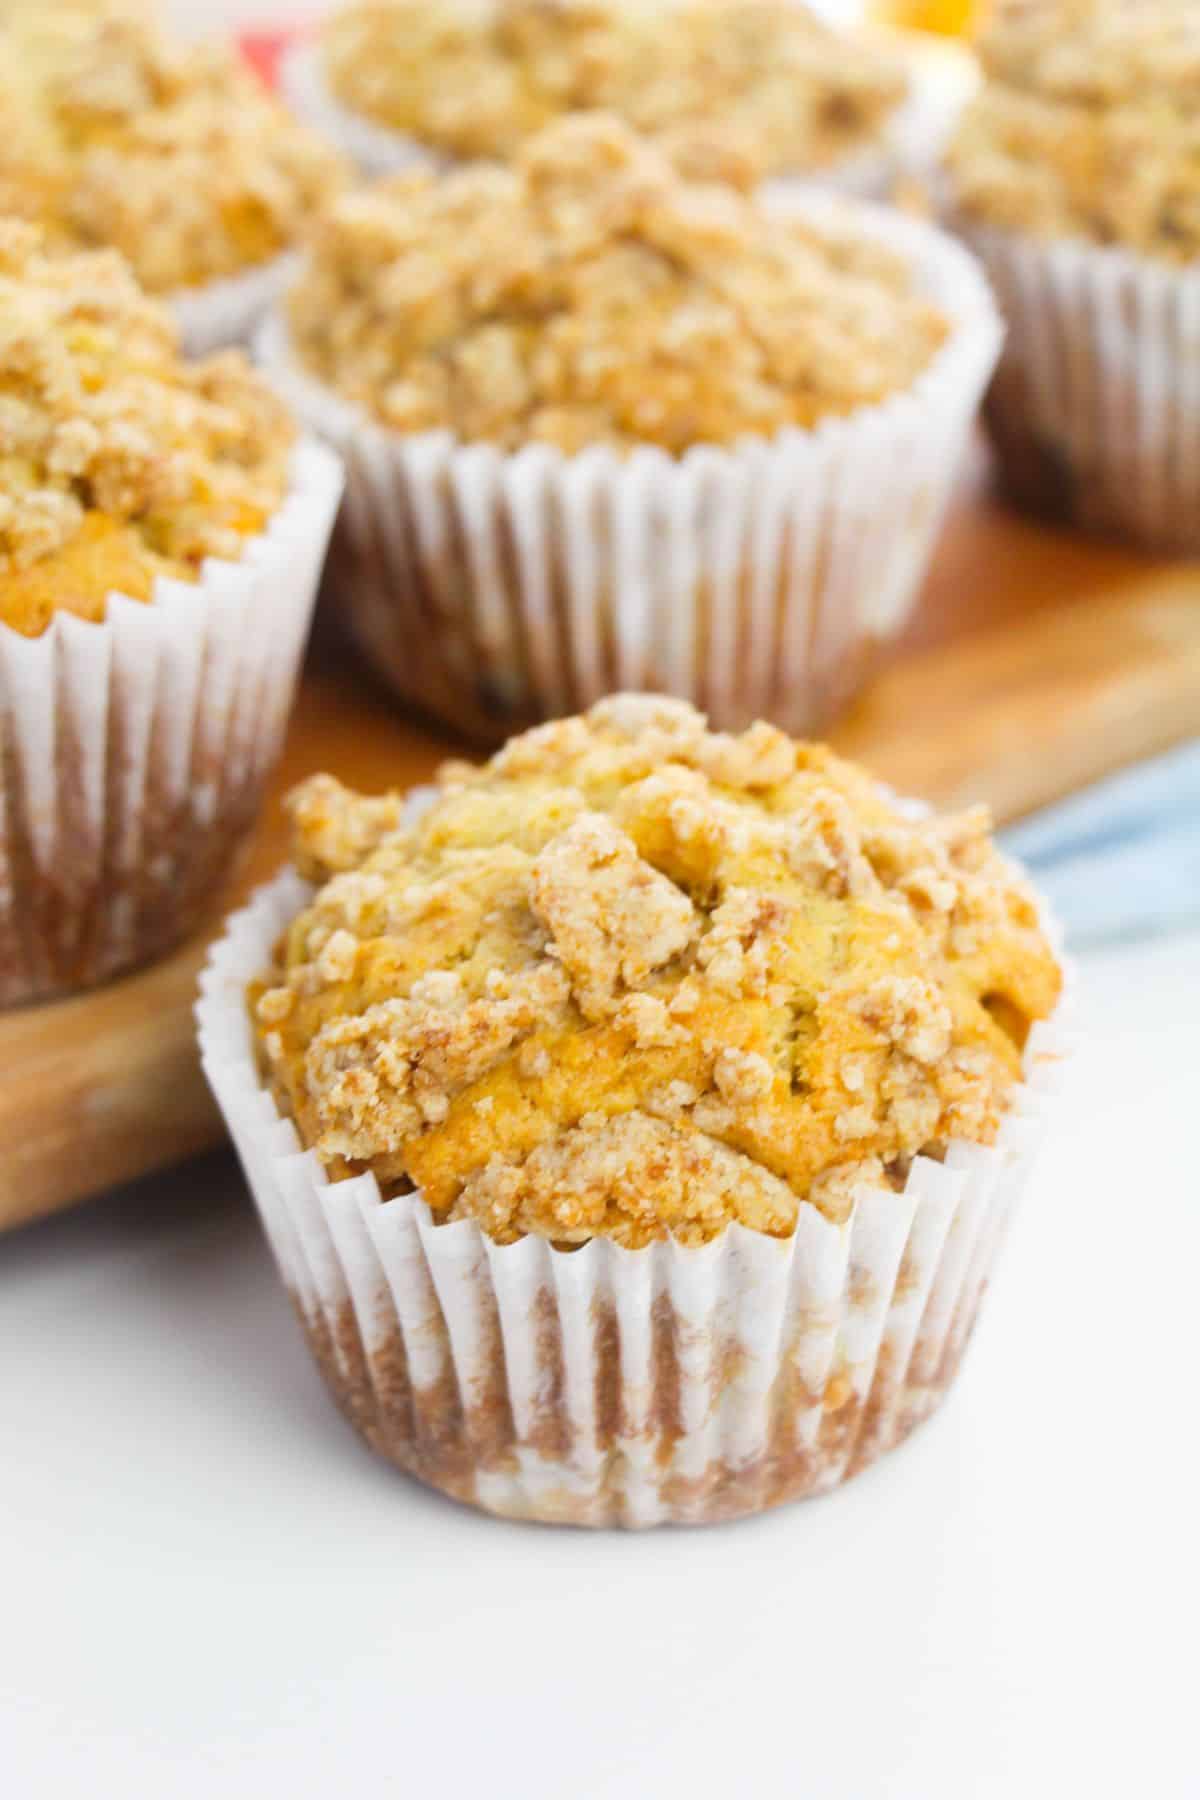 Apple Crumble Muffins on a wooden board.